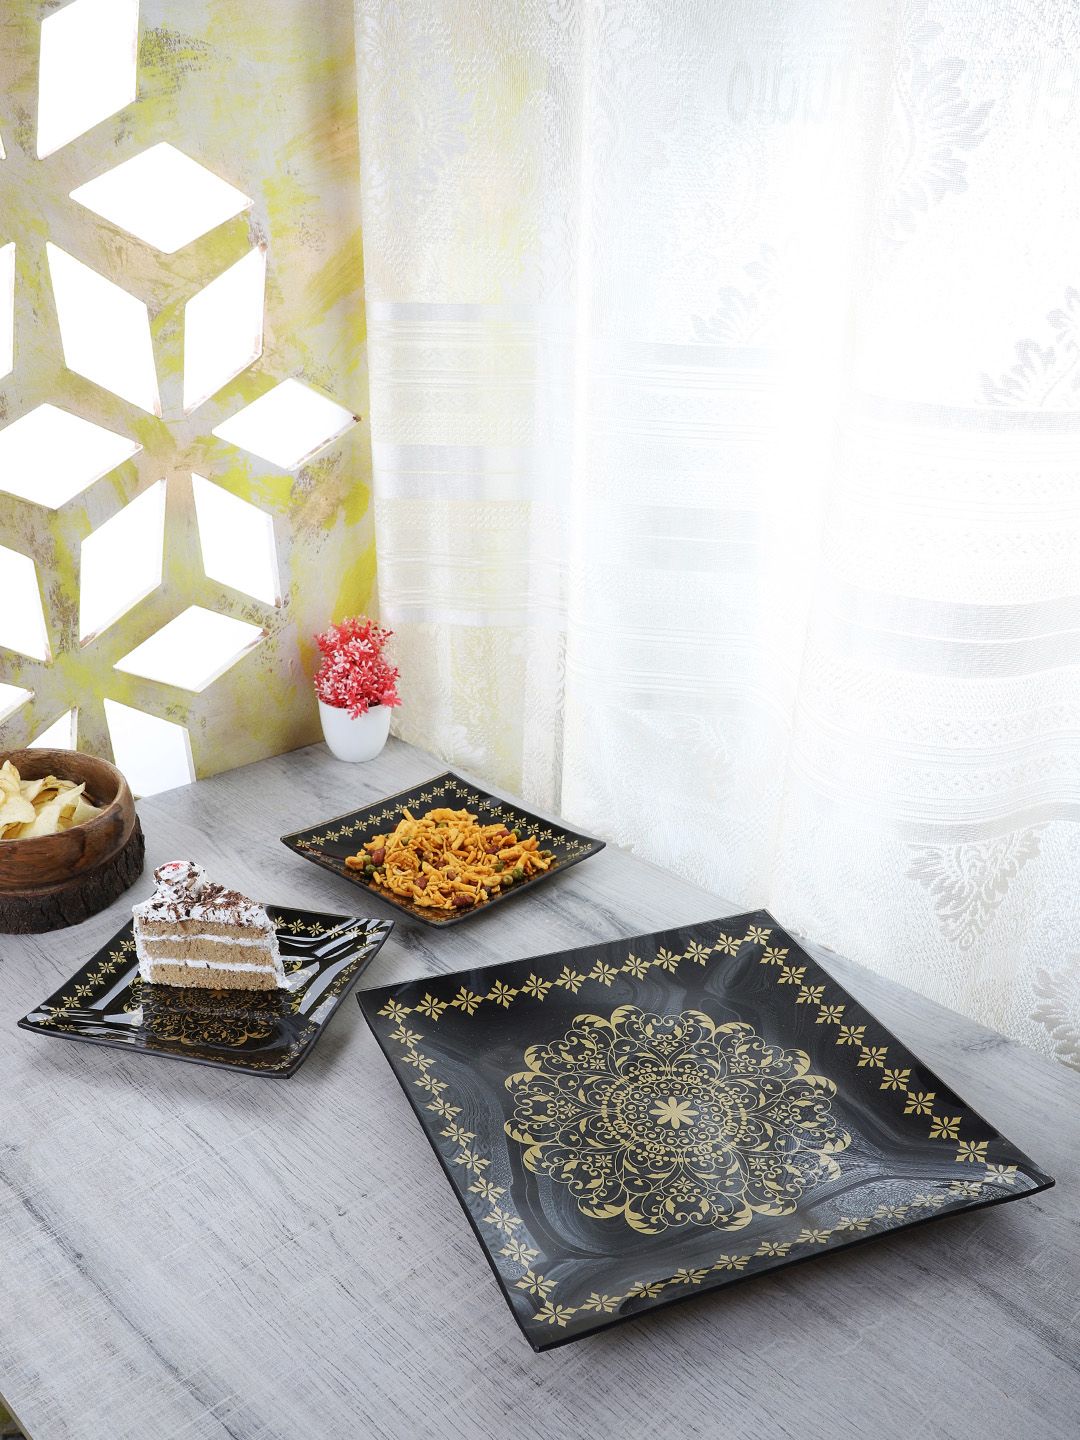 ceradeco Set Of 7 Black & Gold-Toned Printed Small Plates With Serving Plate Price in India